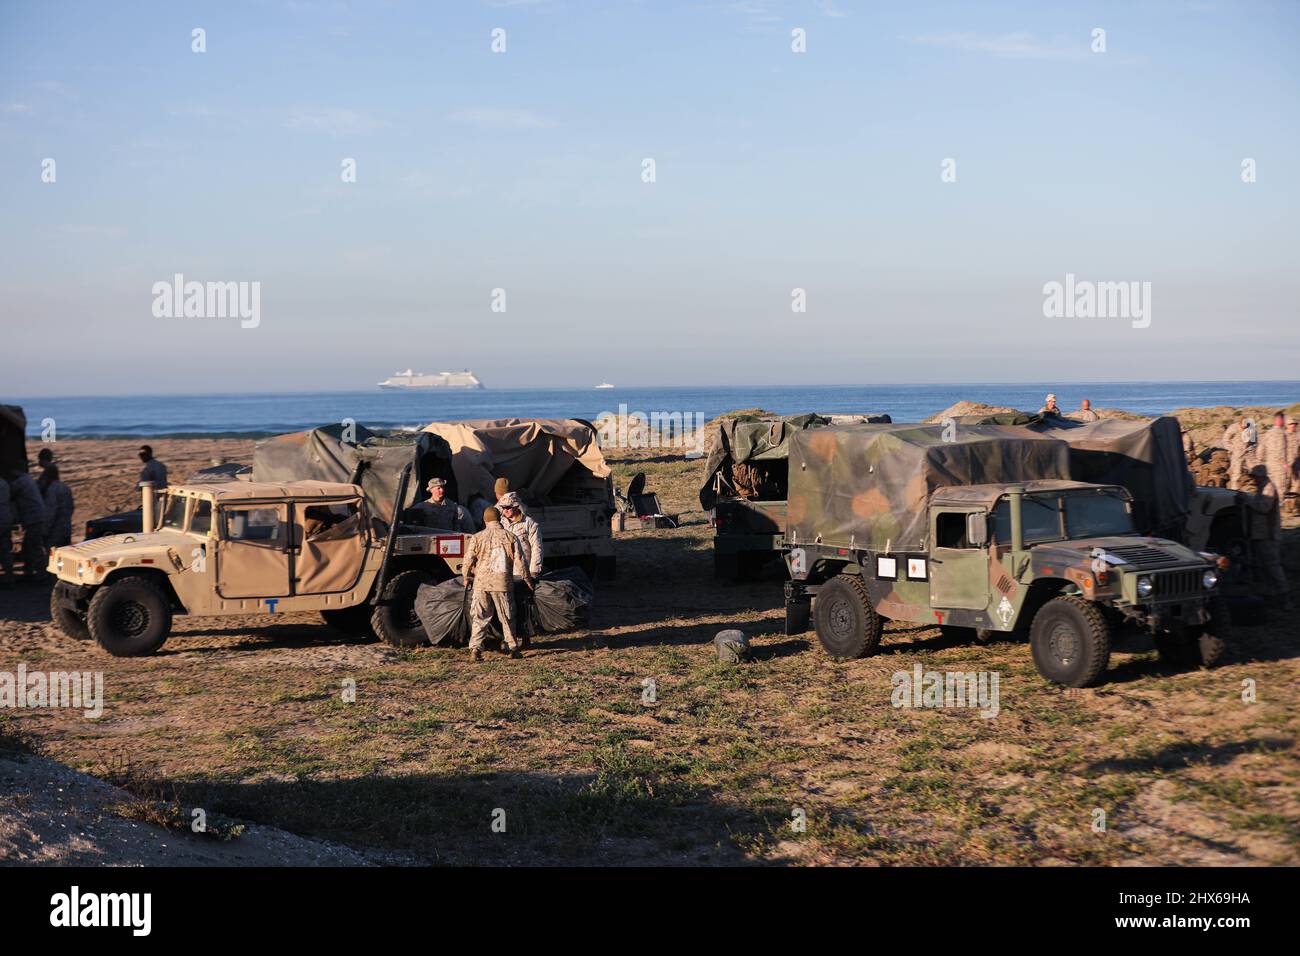 U.S. Marines with 7th Marine Regiment, 1st Marine Division, stage tactical vehicles during a command post exercise on Naval Amphibious Base Coronado, California, March 2, 2022. This evolution provided an opportunity for Marines to practice expedient setup of a regimental headquarters, enabling command and control from distributed locations. (U.S. Marine Corps photo by Sgt. Jailine L. AliceaSantiago) Stock Photo